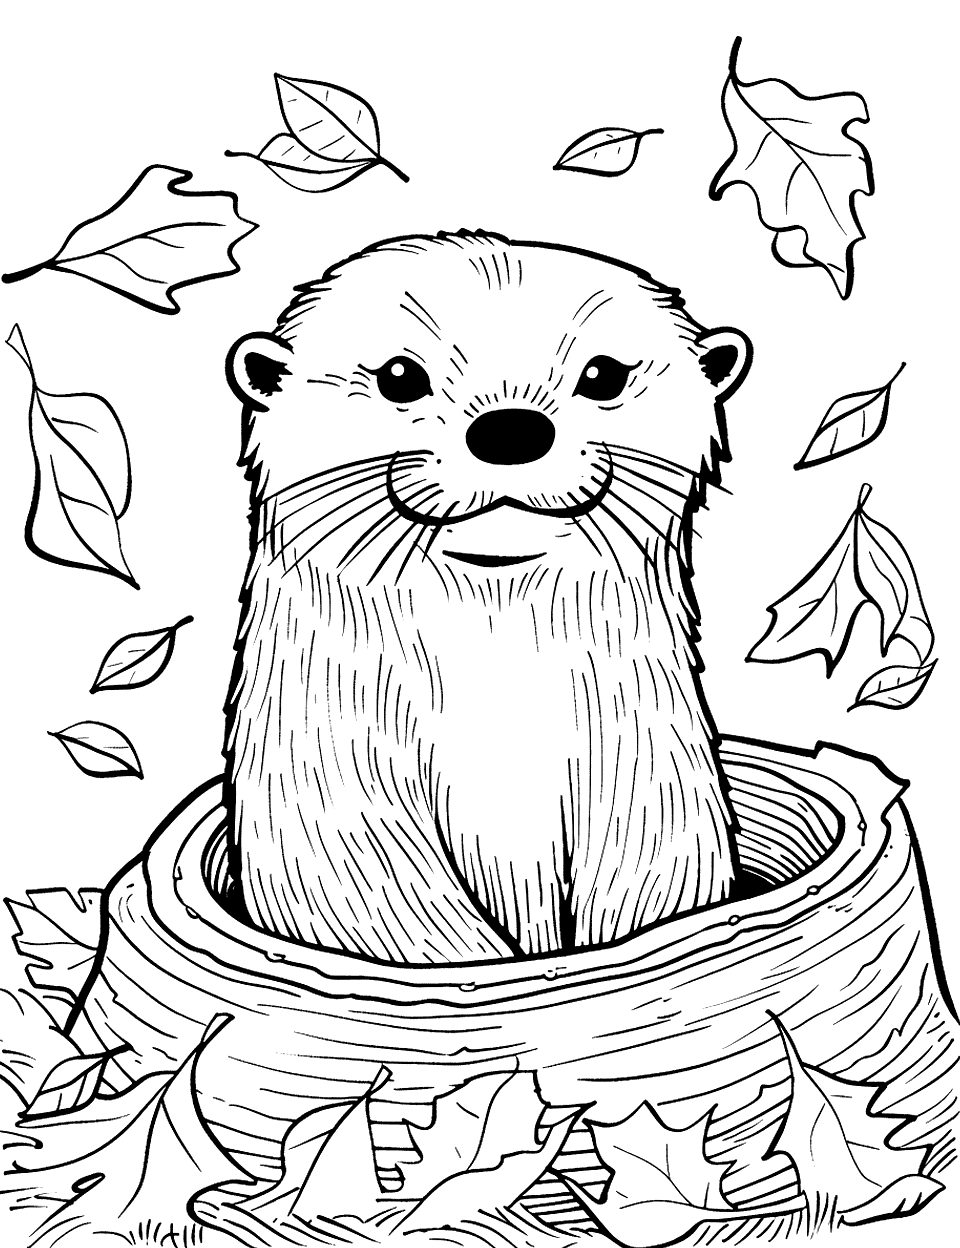 Otter in a Hollow Log Coloring Page - An otter peeking from a hollow log, surrounded by fallen leaves.